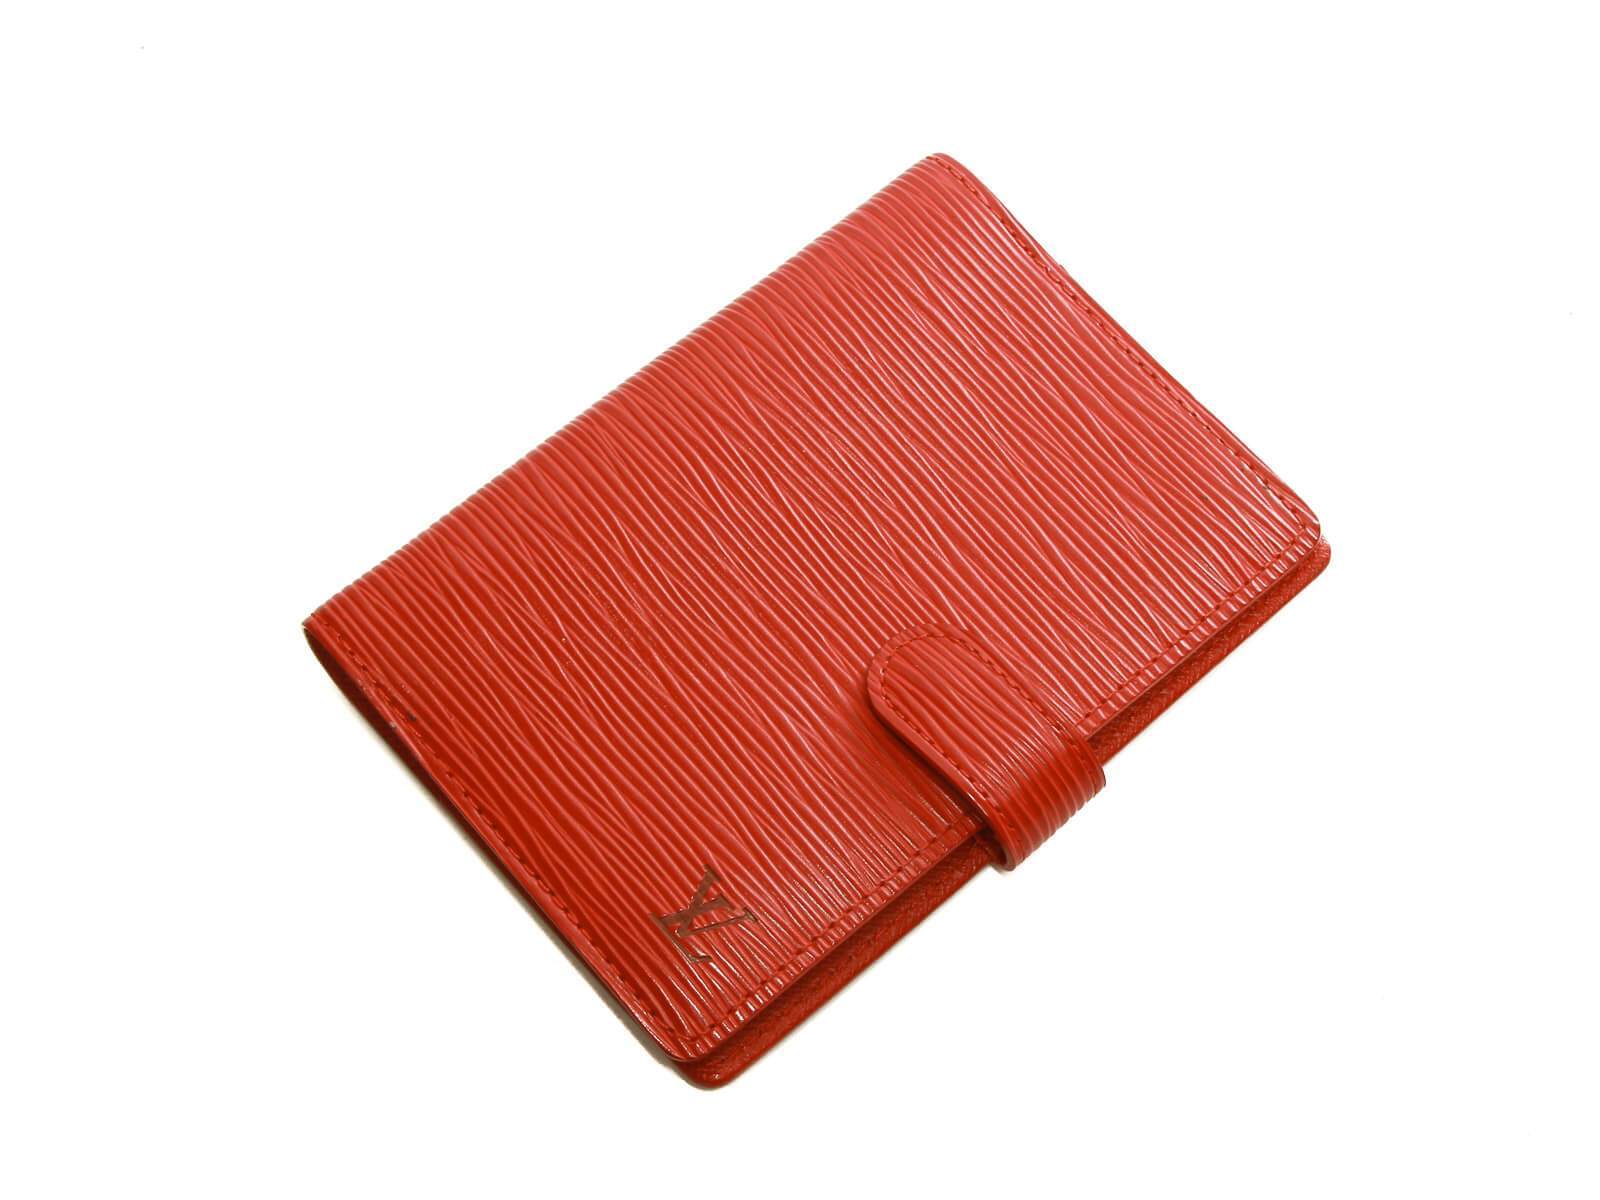 Auth Louis Vuitton Agenda PM Epi Red Schedule notebook Cover A2826Y406